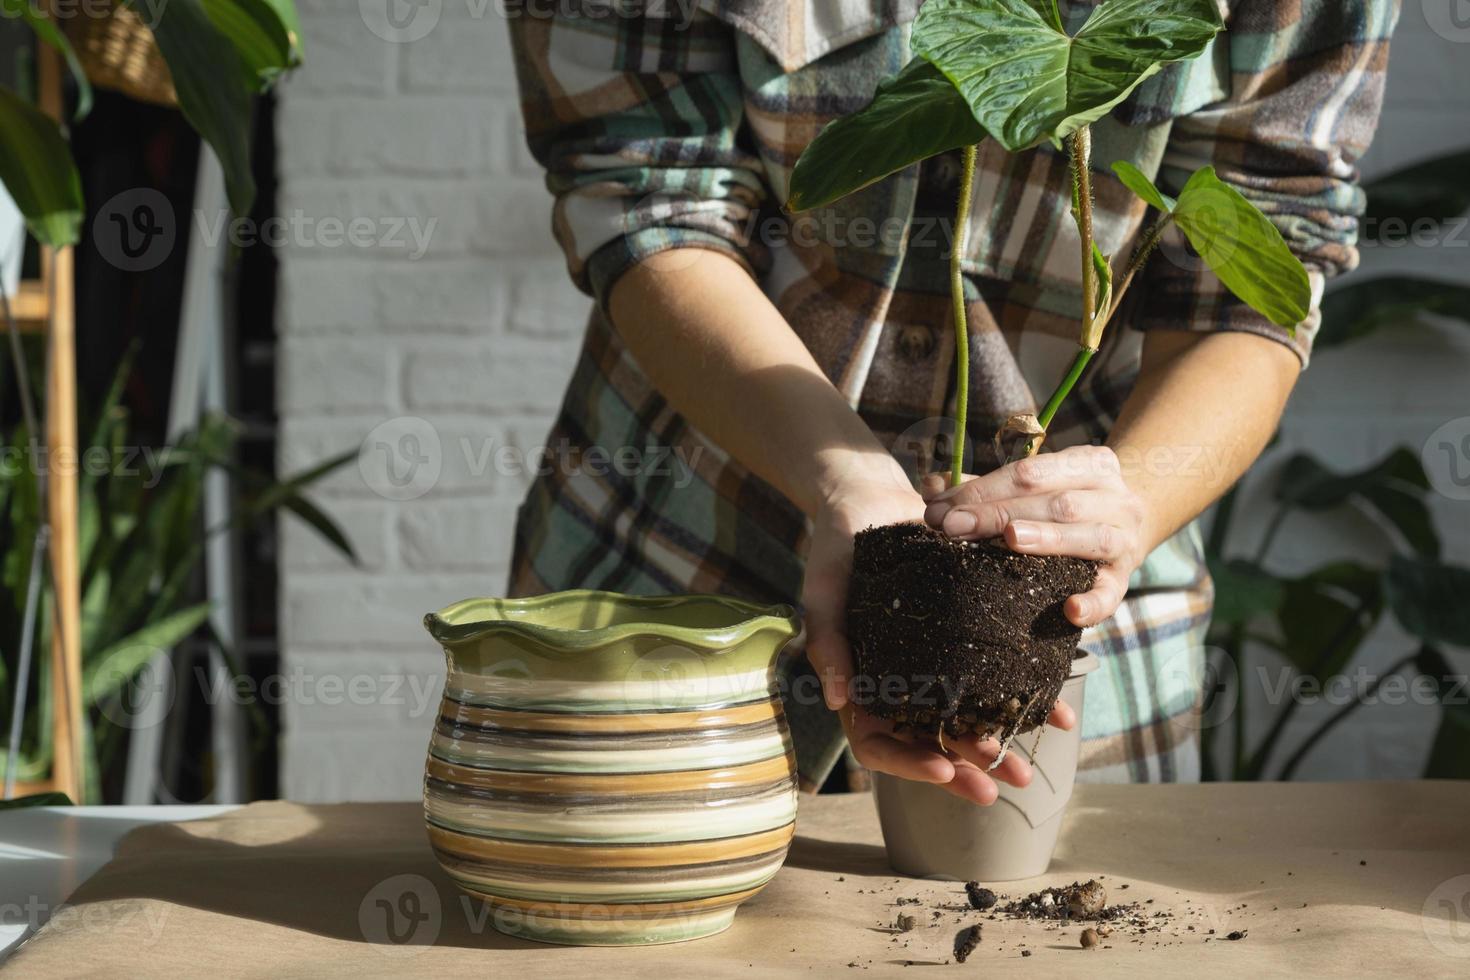 Transplanting a home plant Philodendron verrucosum into a new bigger pot in home interior. Caring for a potted plant, hands close-up photo